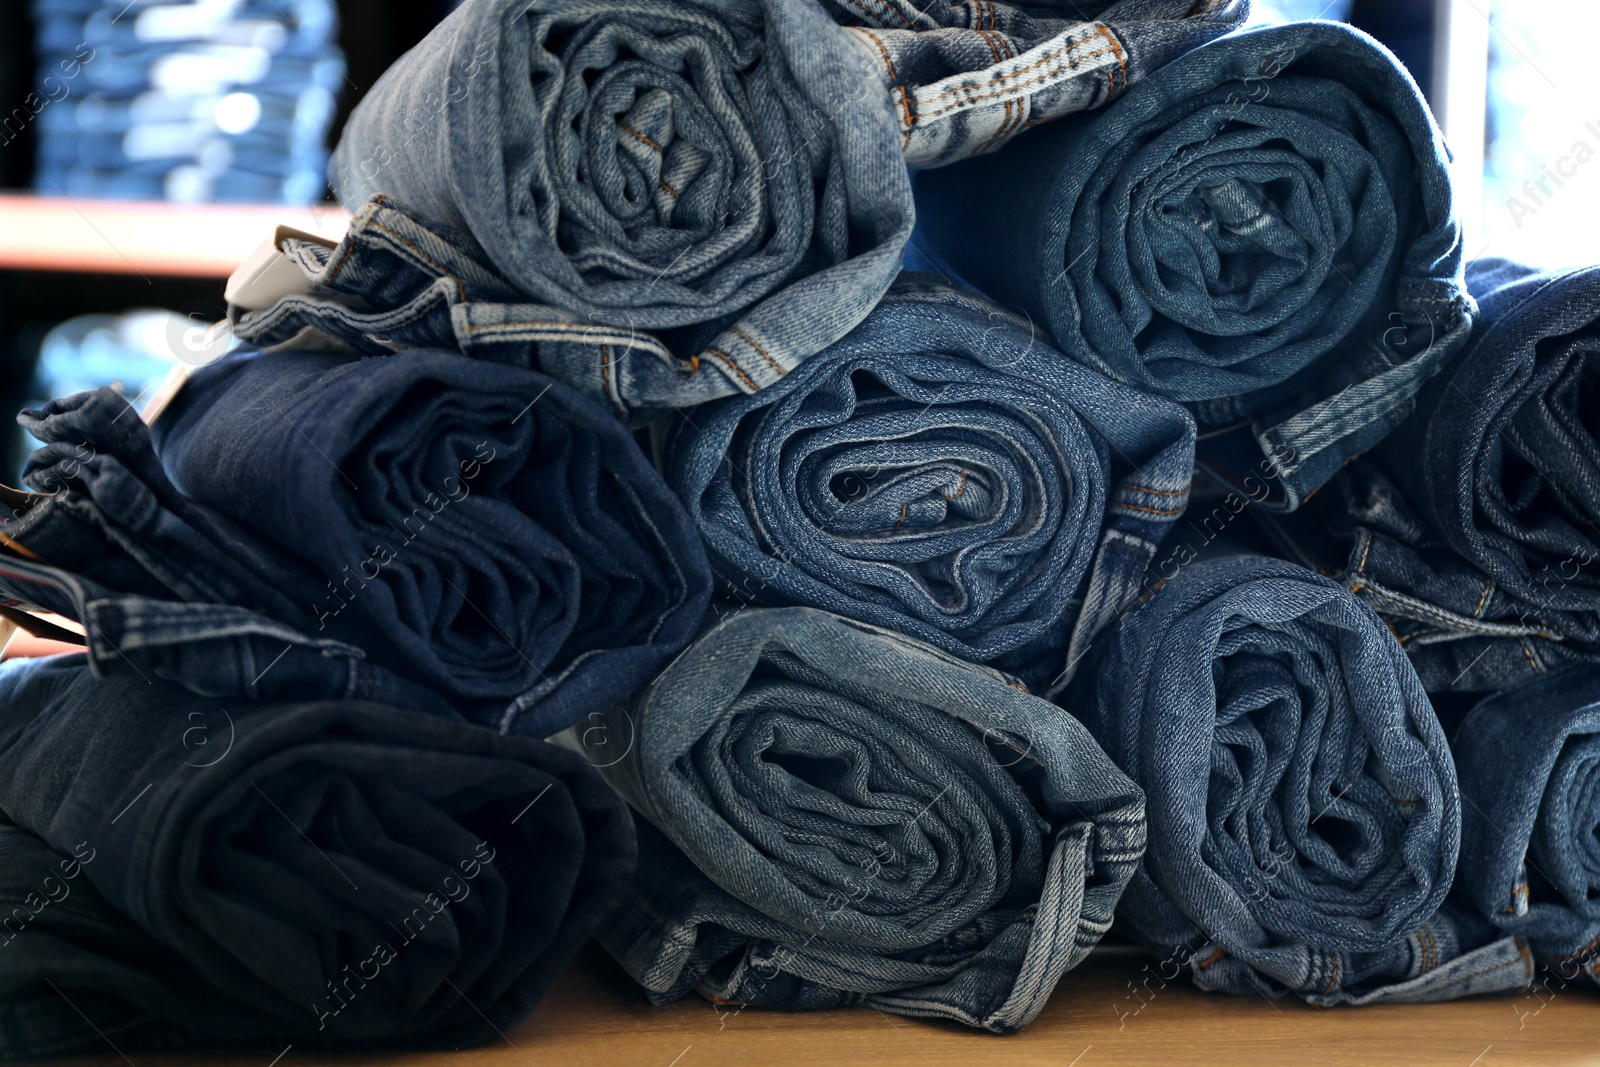 Photo of Rolled modern jeans on display in shop, closeup